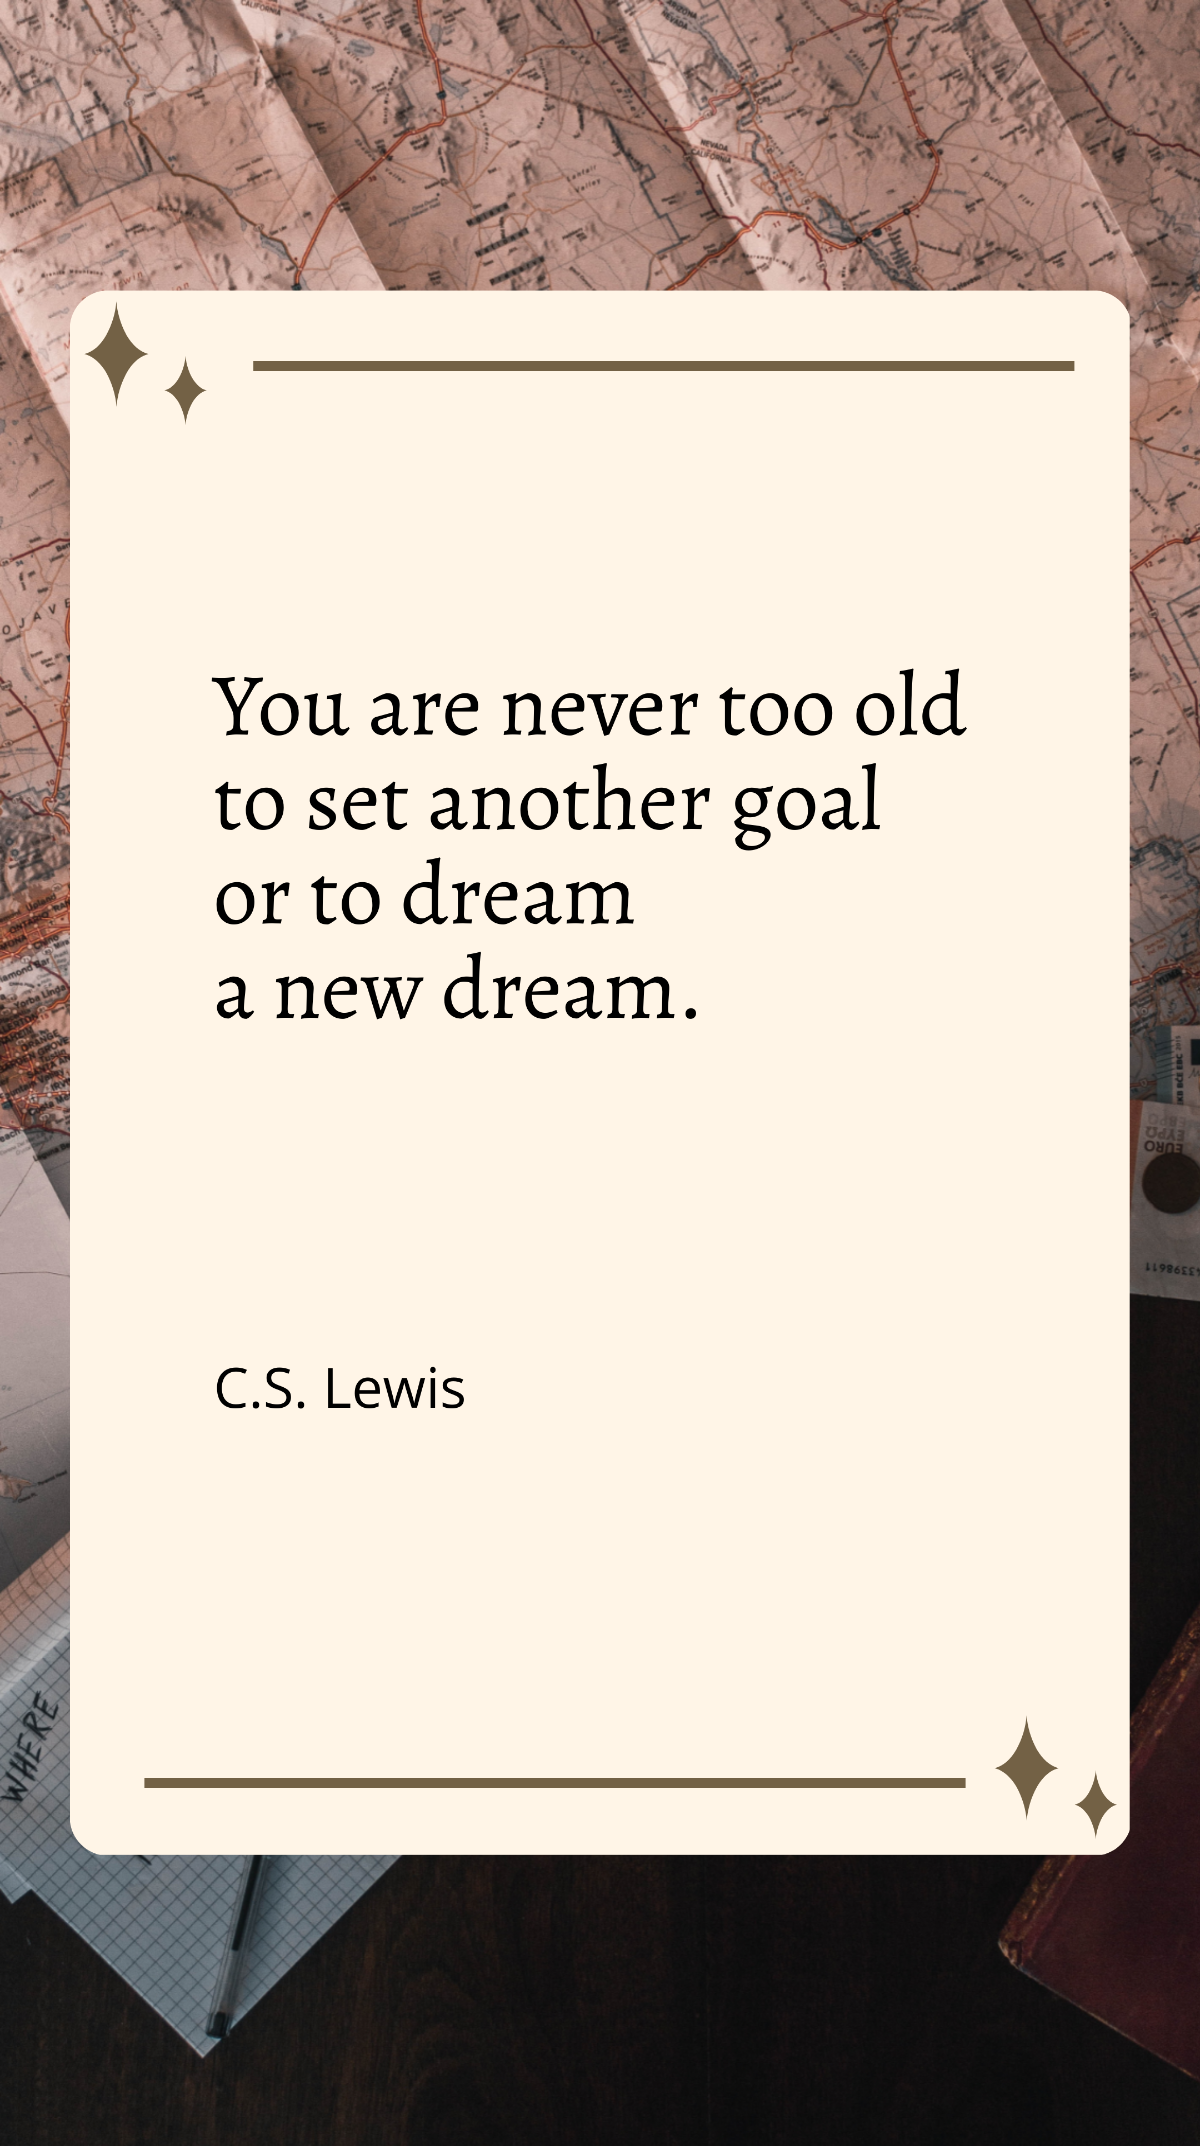 C.S. Lewis - You are never too old to set another goal or to dream a new dream Template